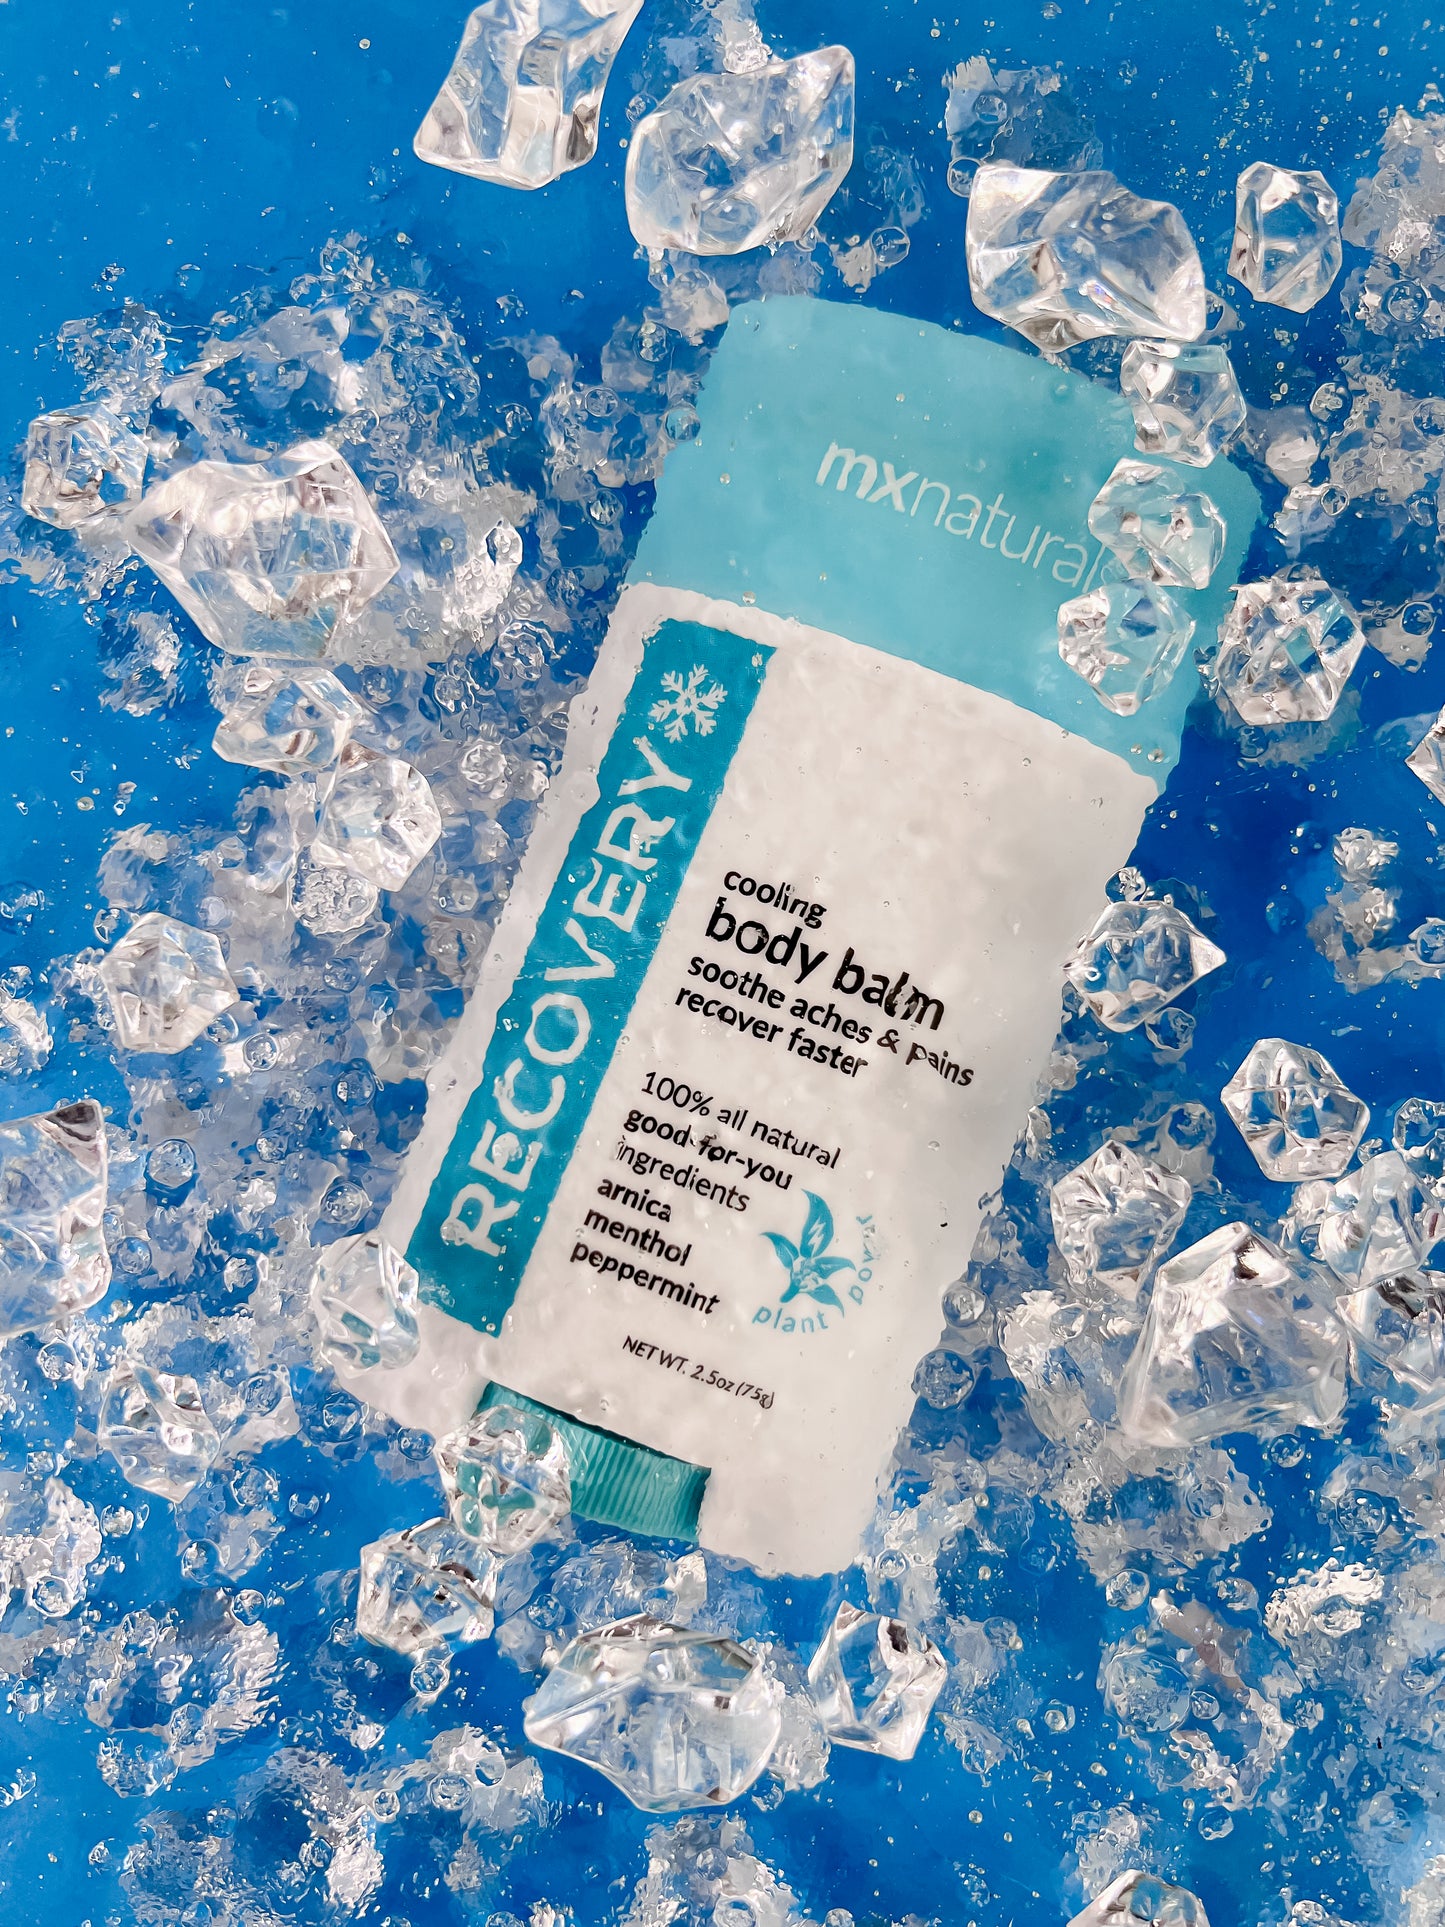 a white and blue product titled "recovery cooling body care balm"  is submerged under ice cold water to represent the chill of the product on a blue background.